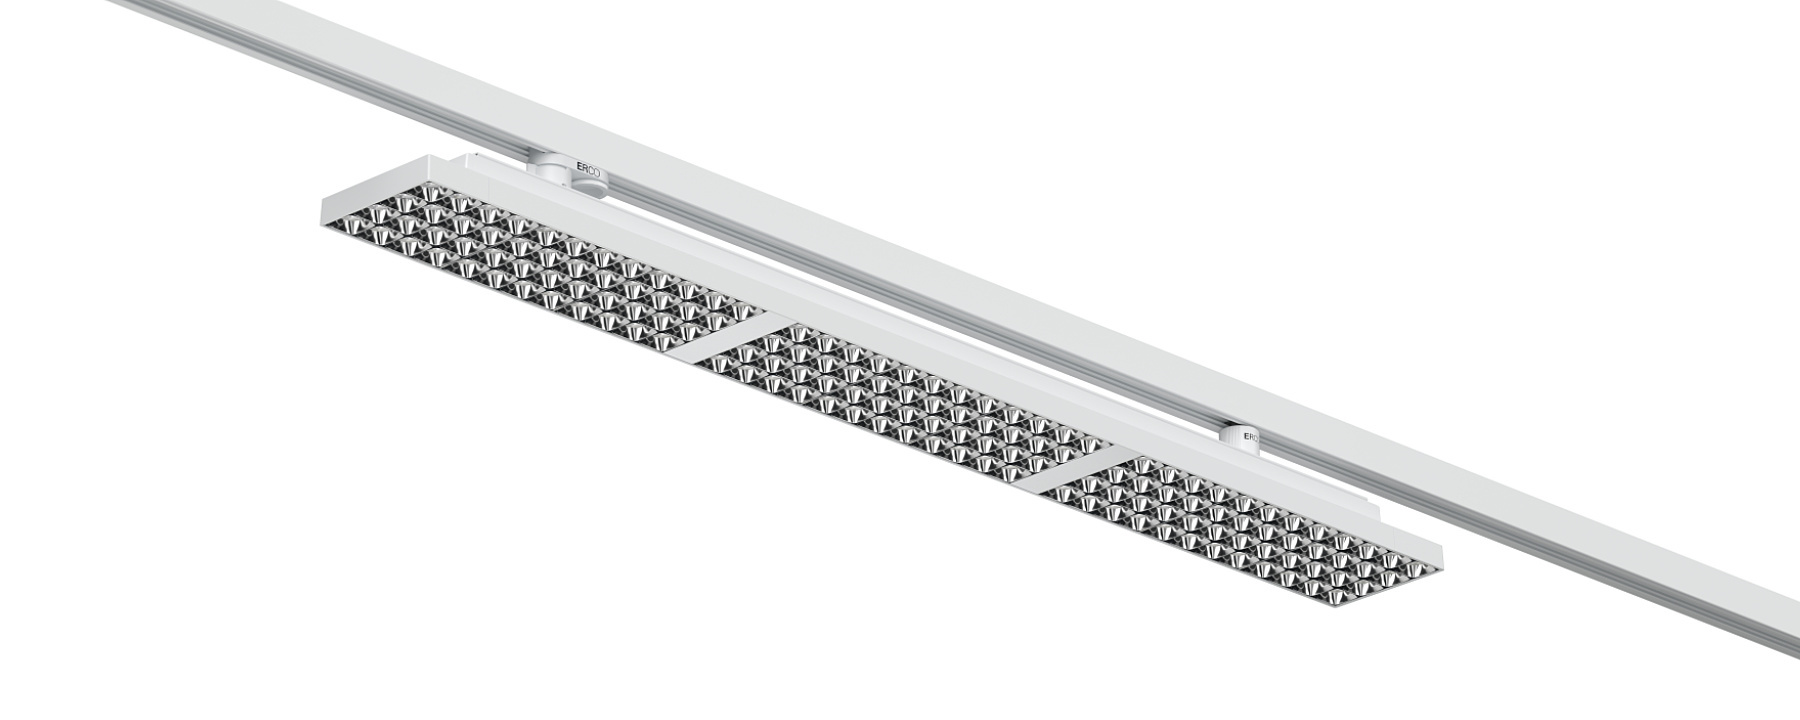 Jilly linear - Luminaires for track